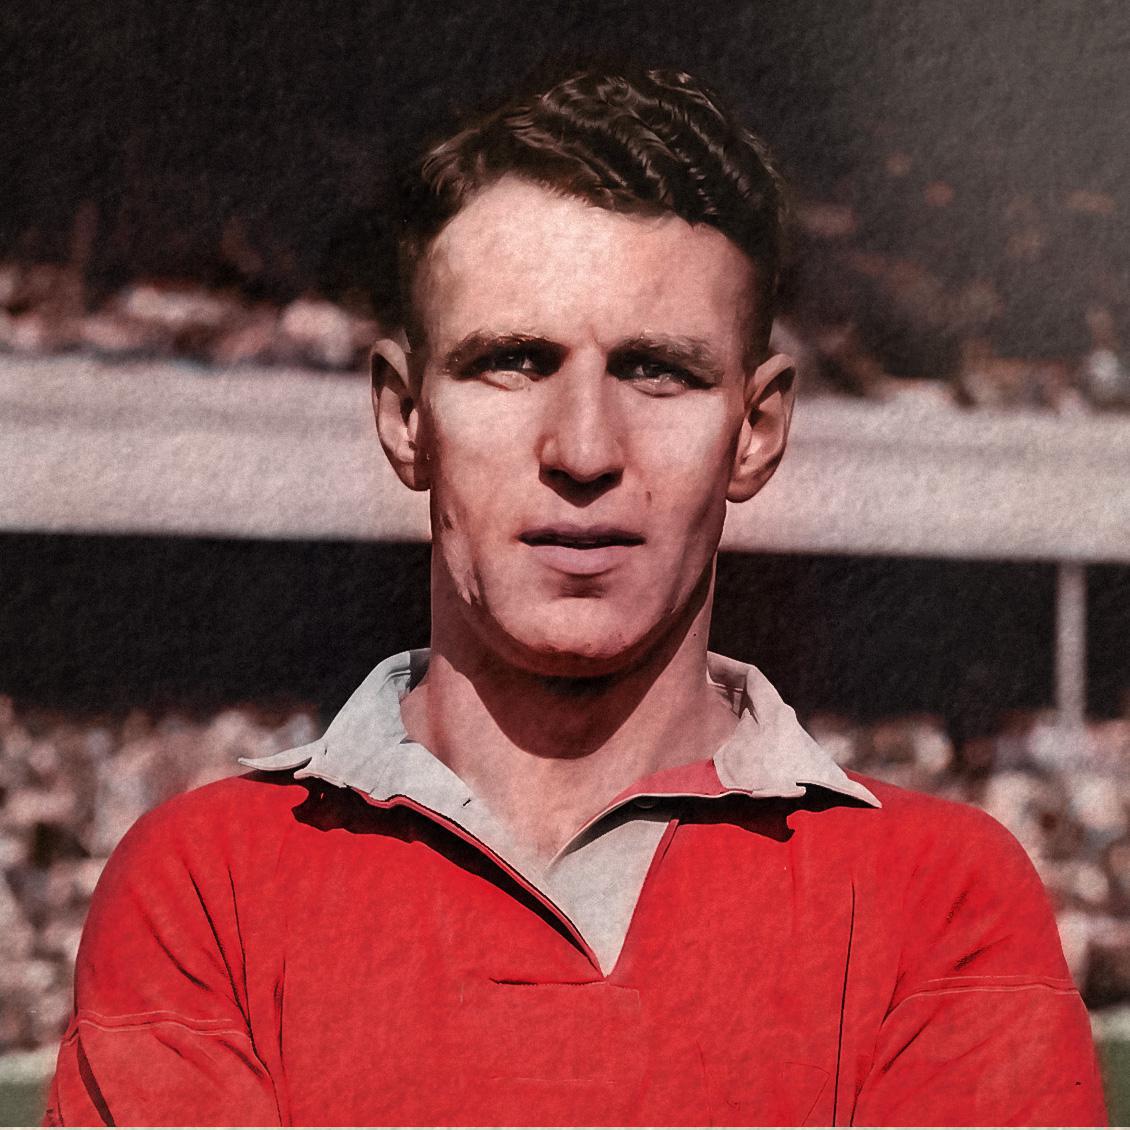 Manchester United top scorers all-time - Jack Rowley